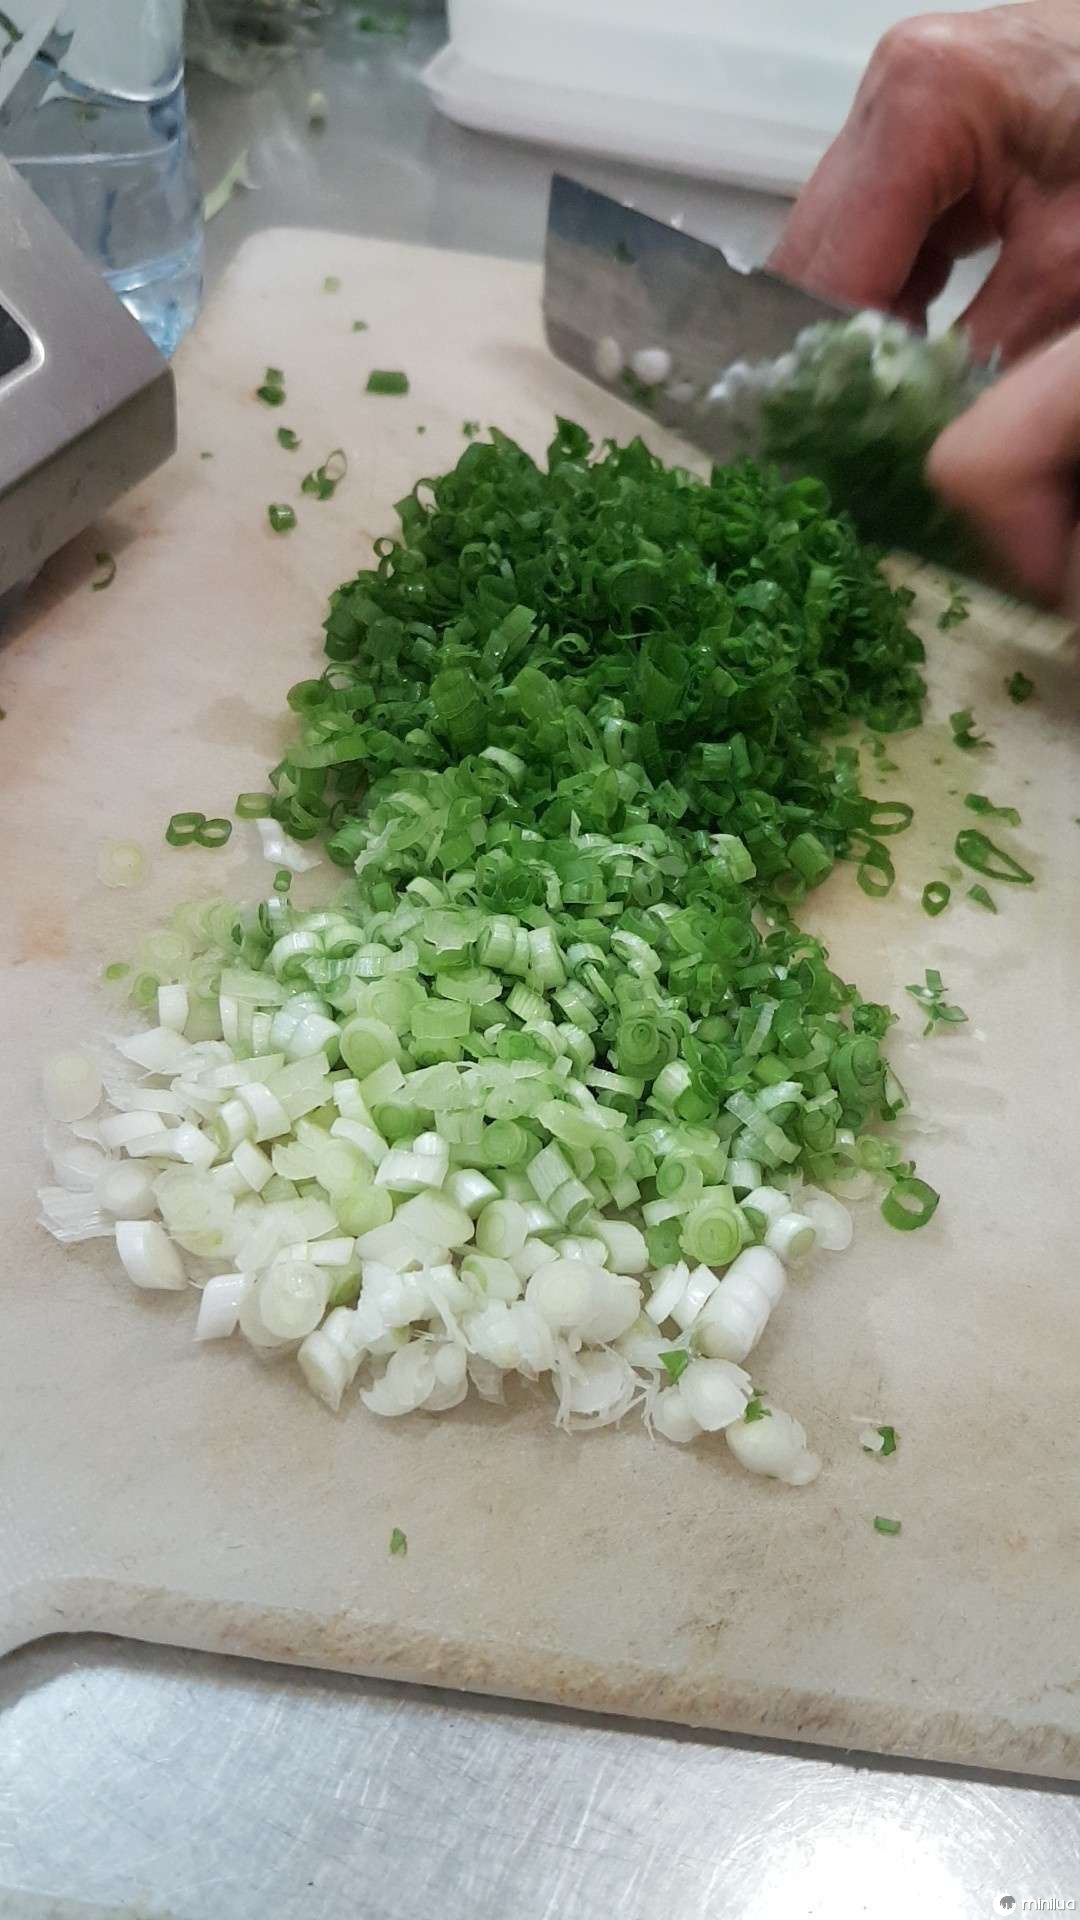 It takes a master chef to leave a trail of color transition as they cut these scallions to a million bits.